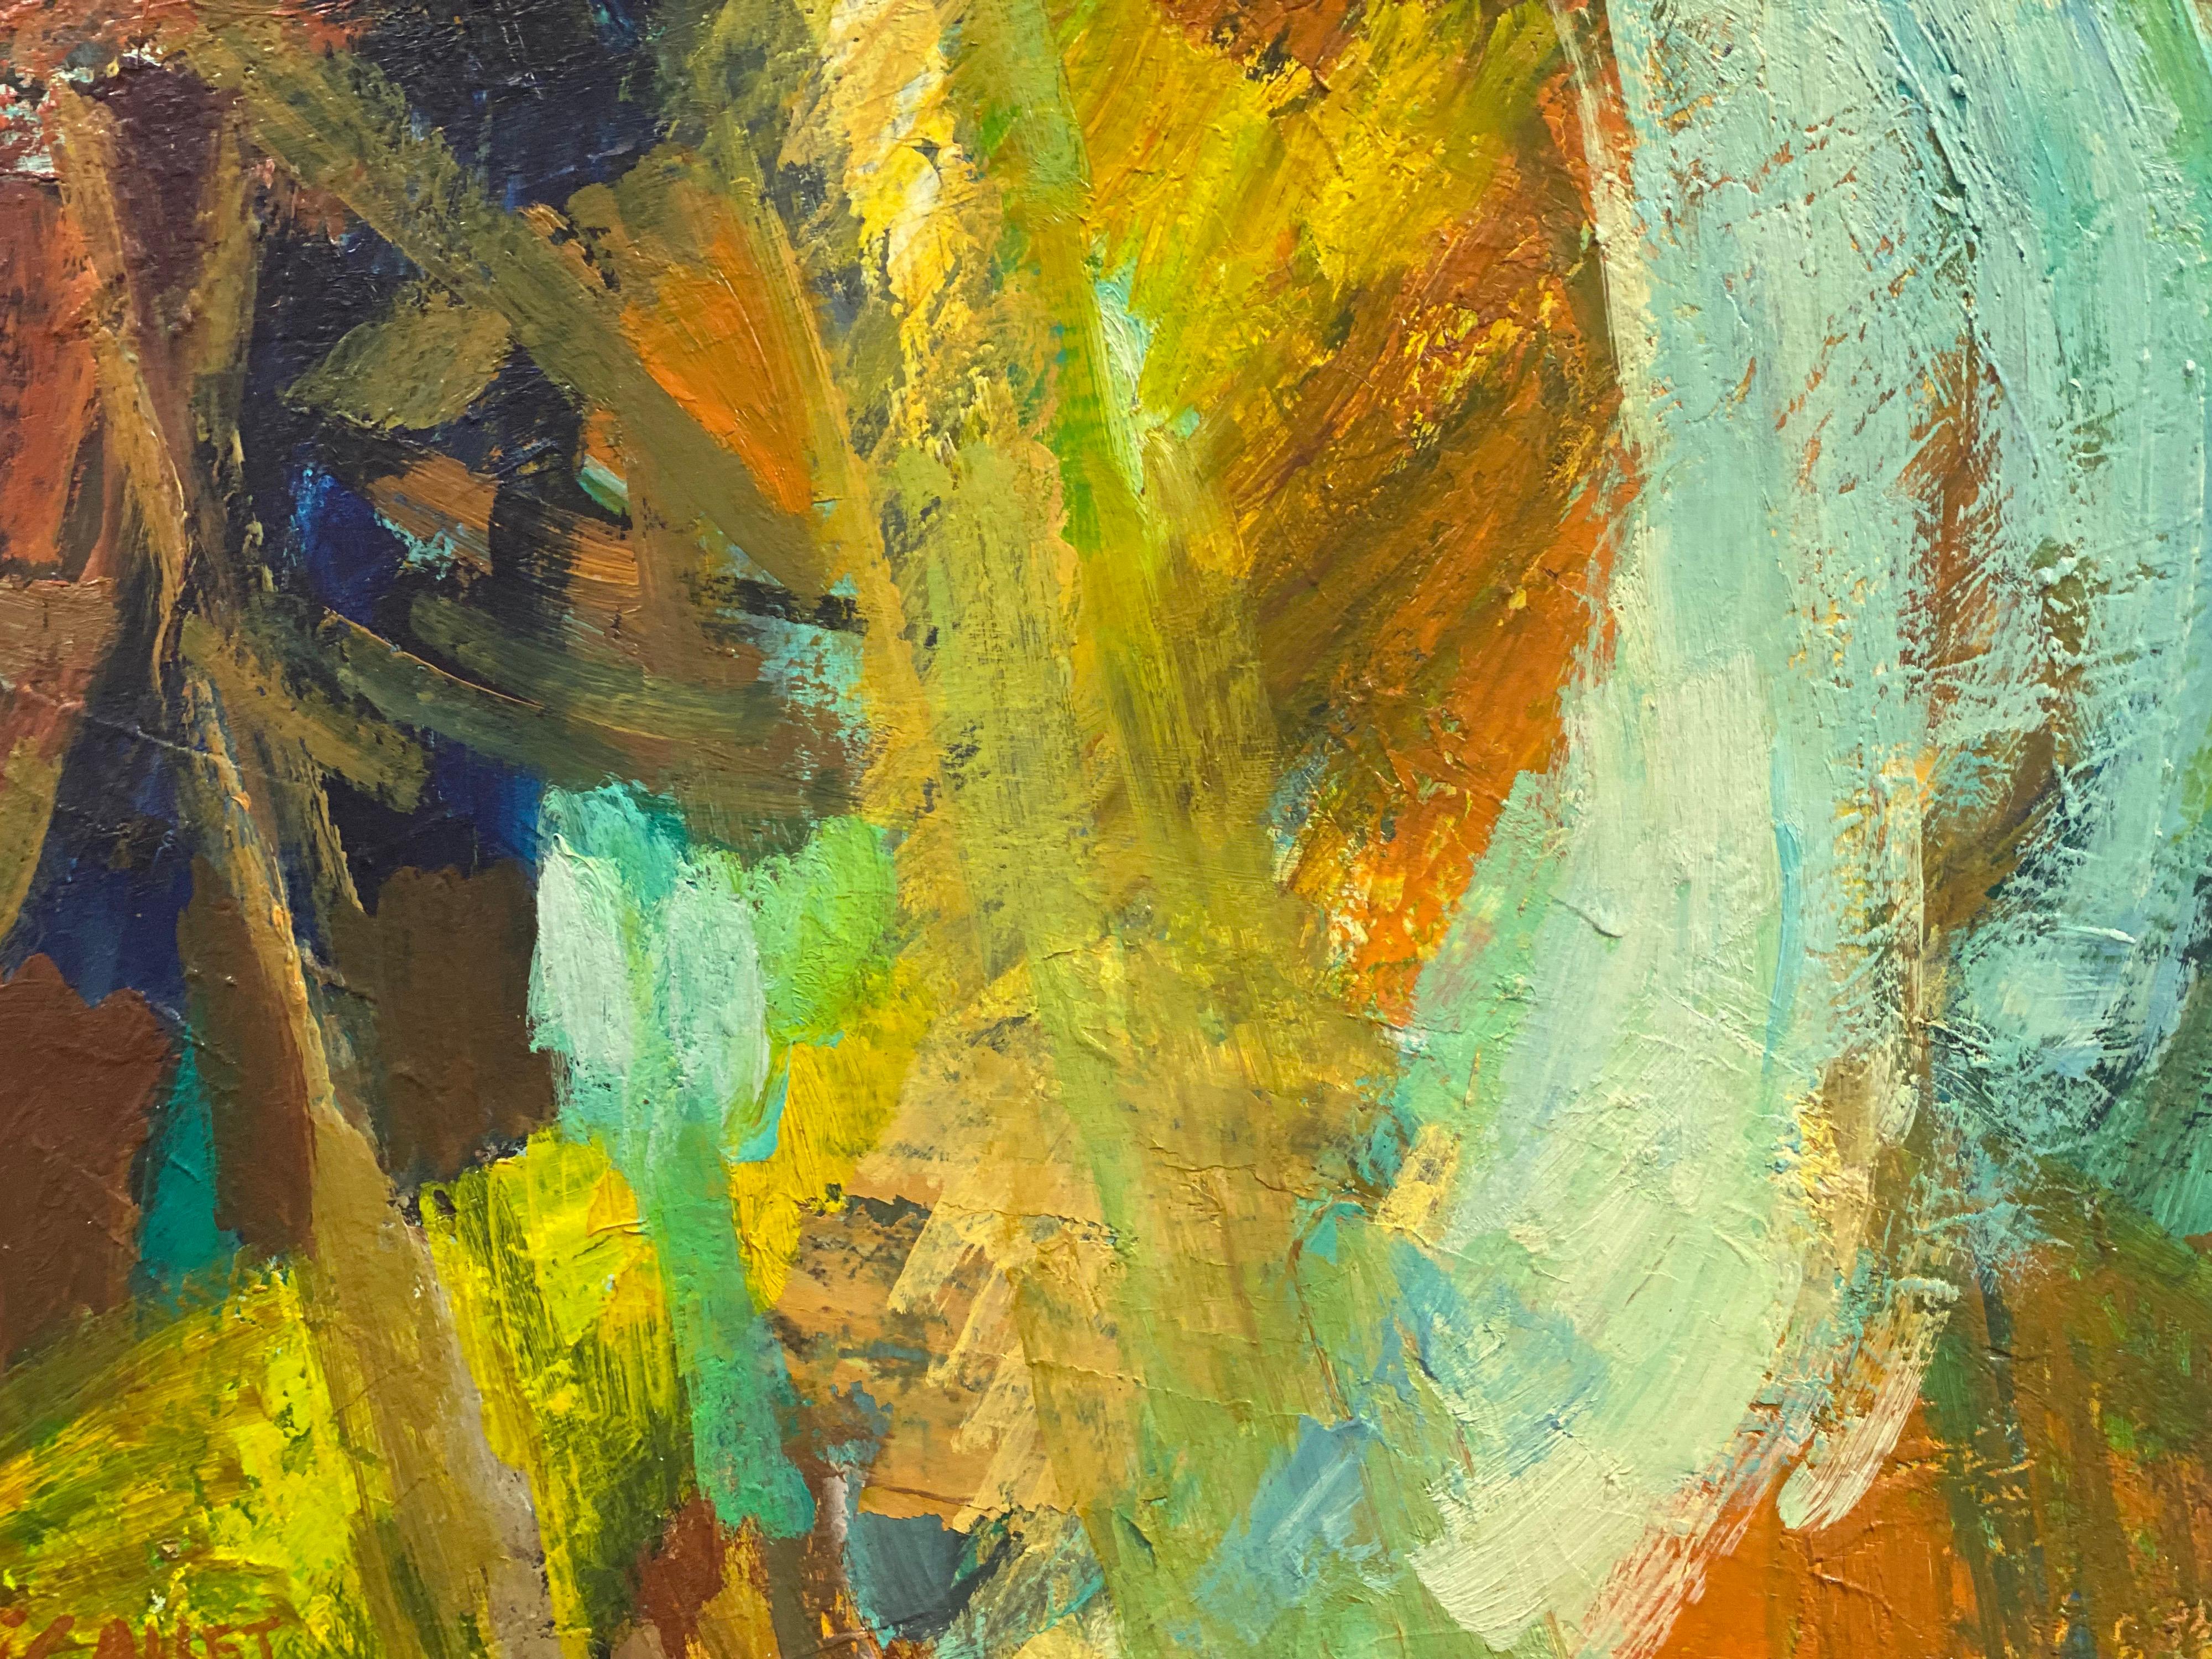 Artist/ School: Jostne Gallet, dated 1965

Title: Expressionist abstract blur of orange, brown and green colors. 

Medium: signed oil painting on canvas, framed and inscribed verso.

framed: 26.5 x 22 inches
canvas: 25.5 x 21.5 inches

Provenance: